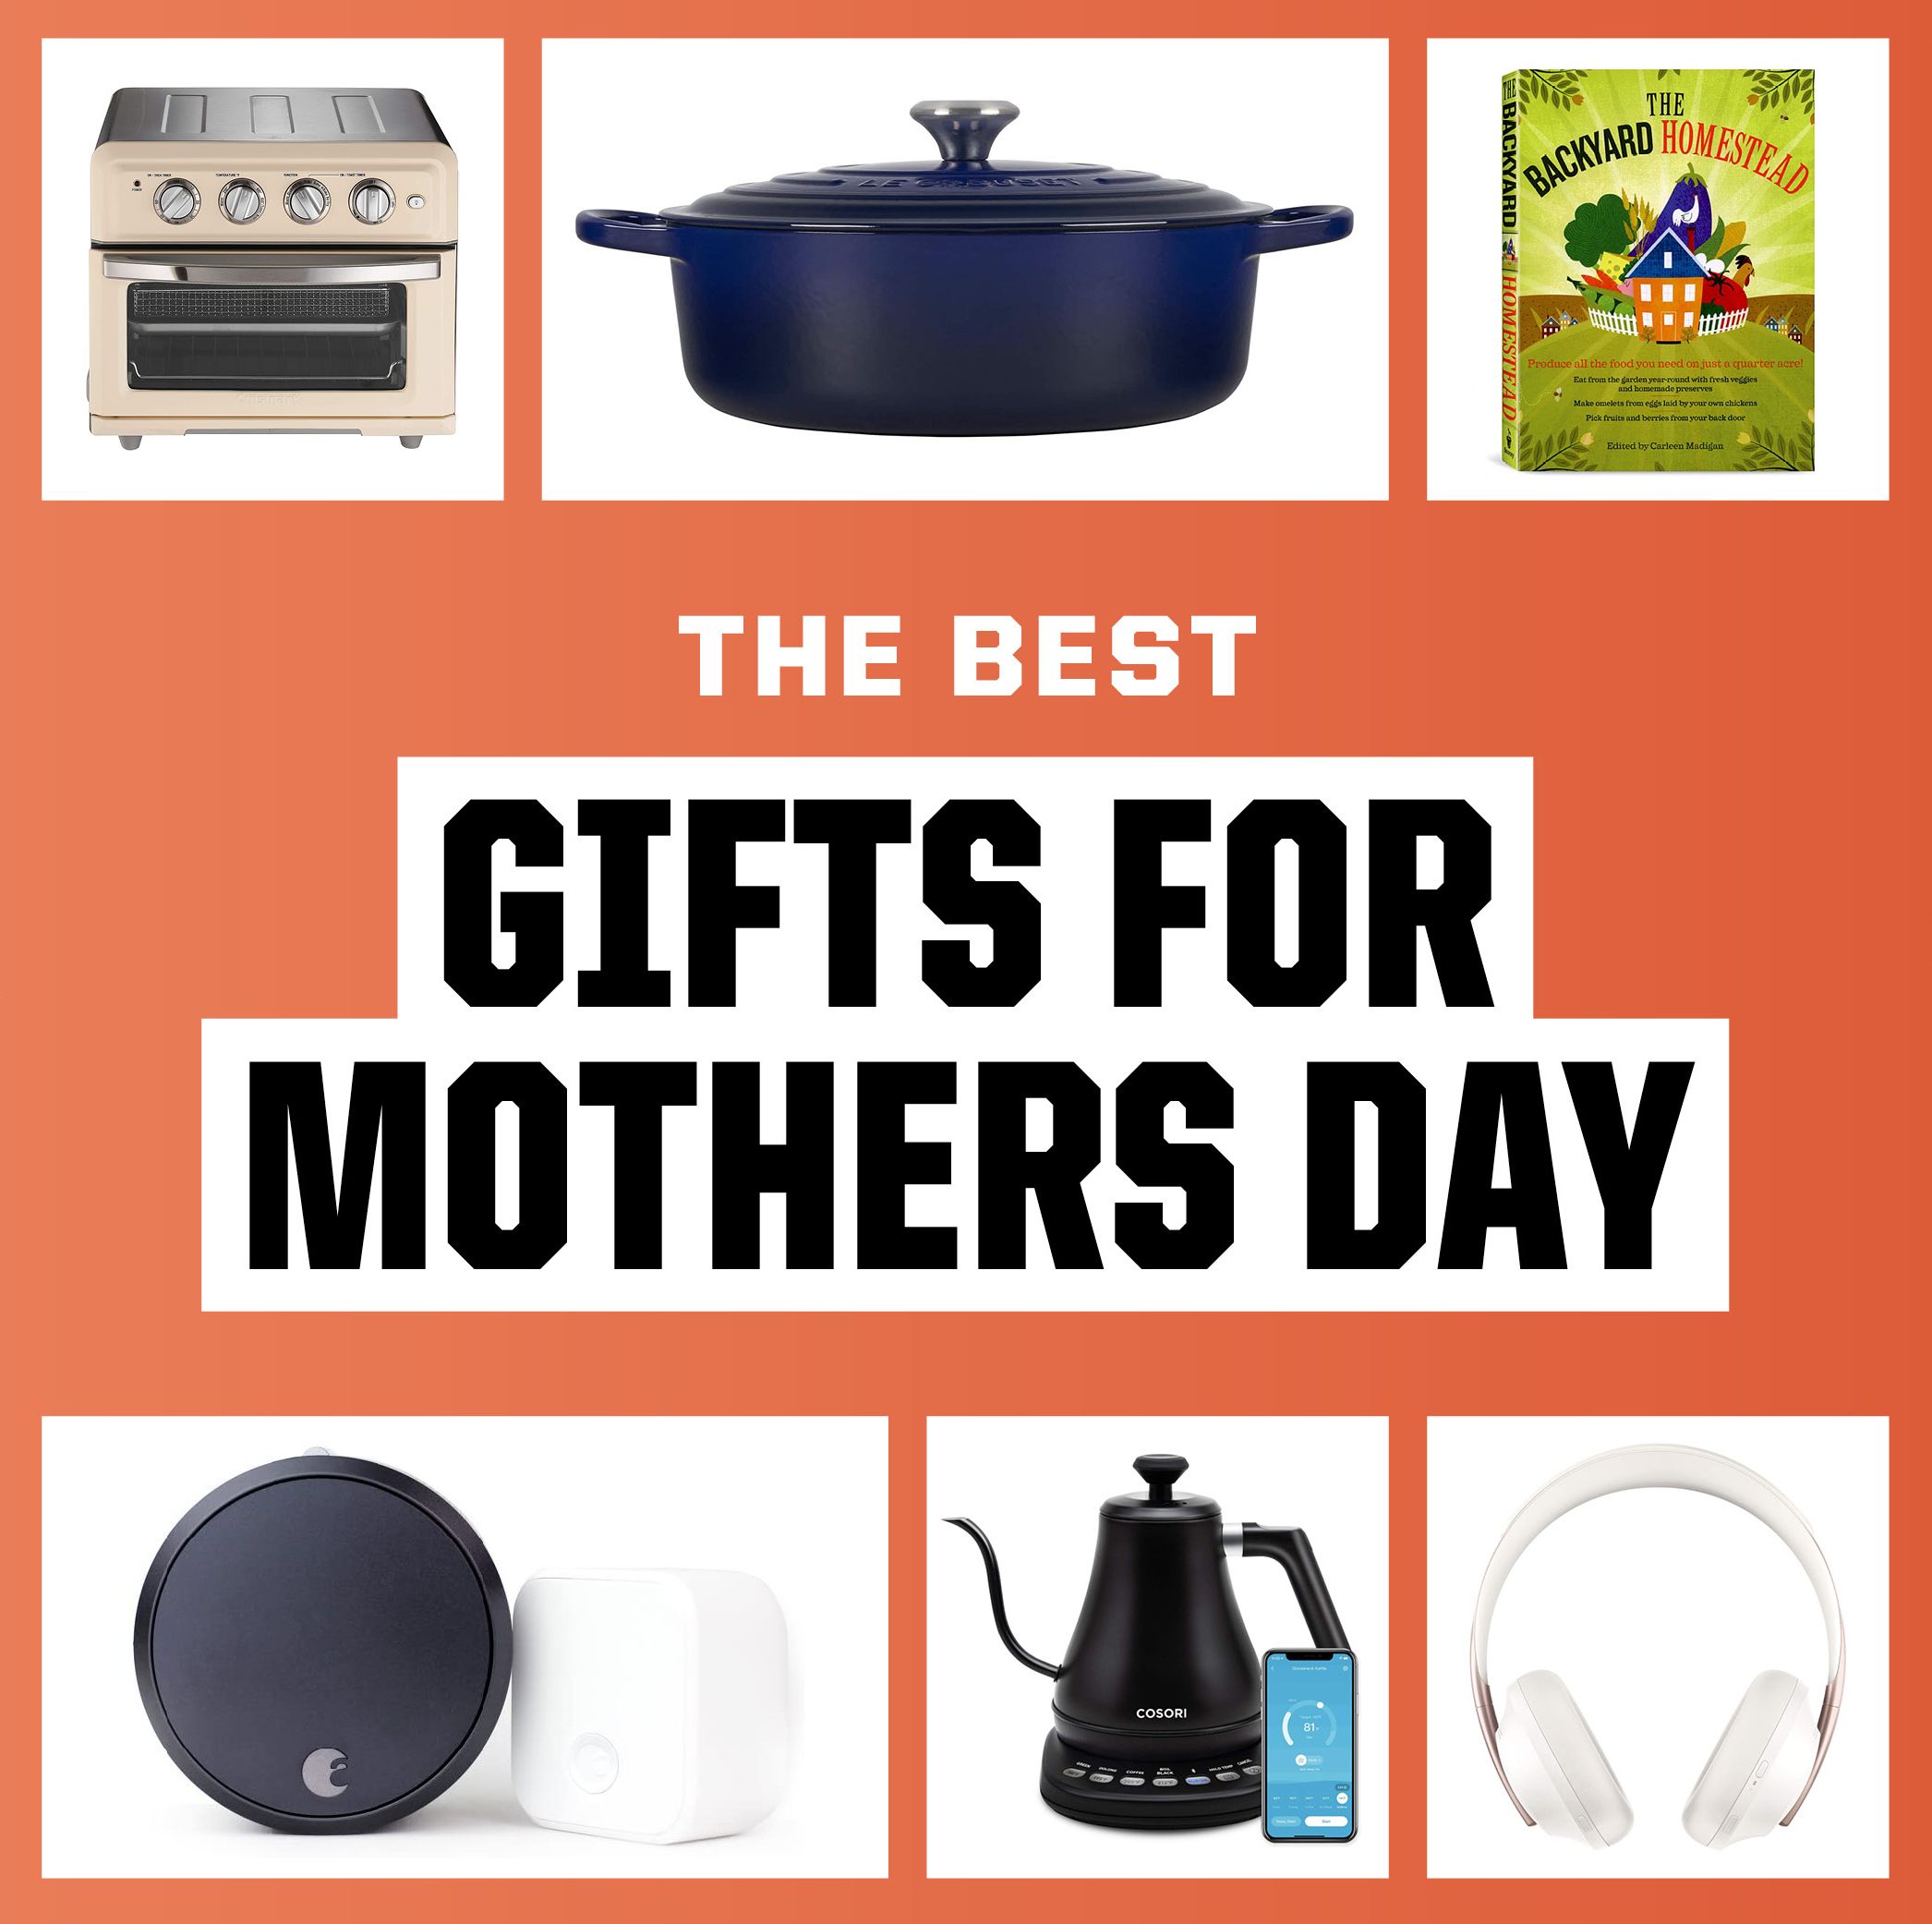 The 30 Best Mother's Day Gifts That Are Both Thoughtful and Practical